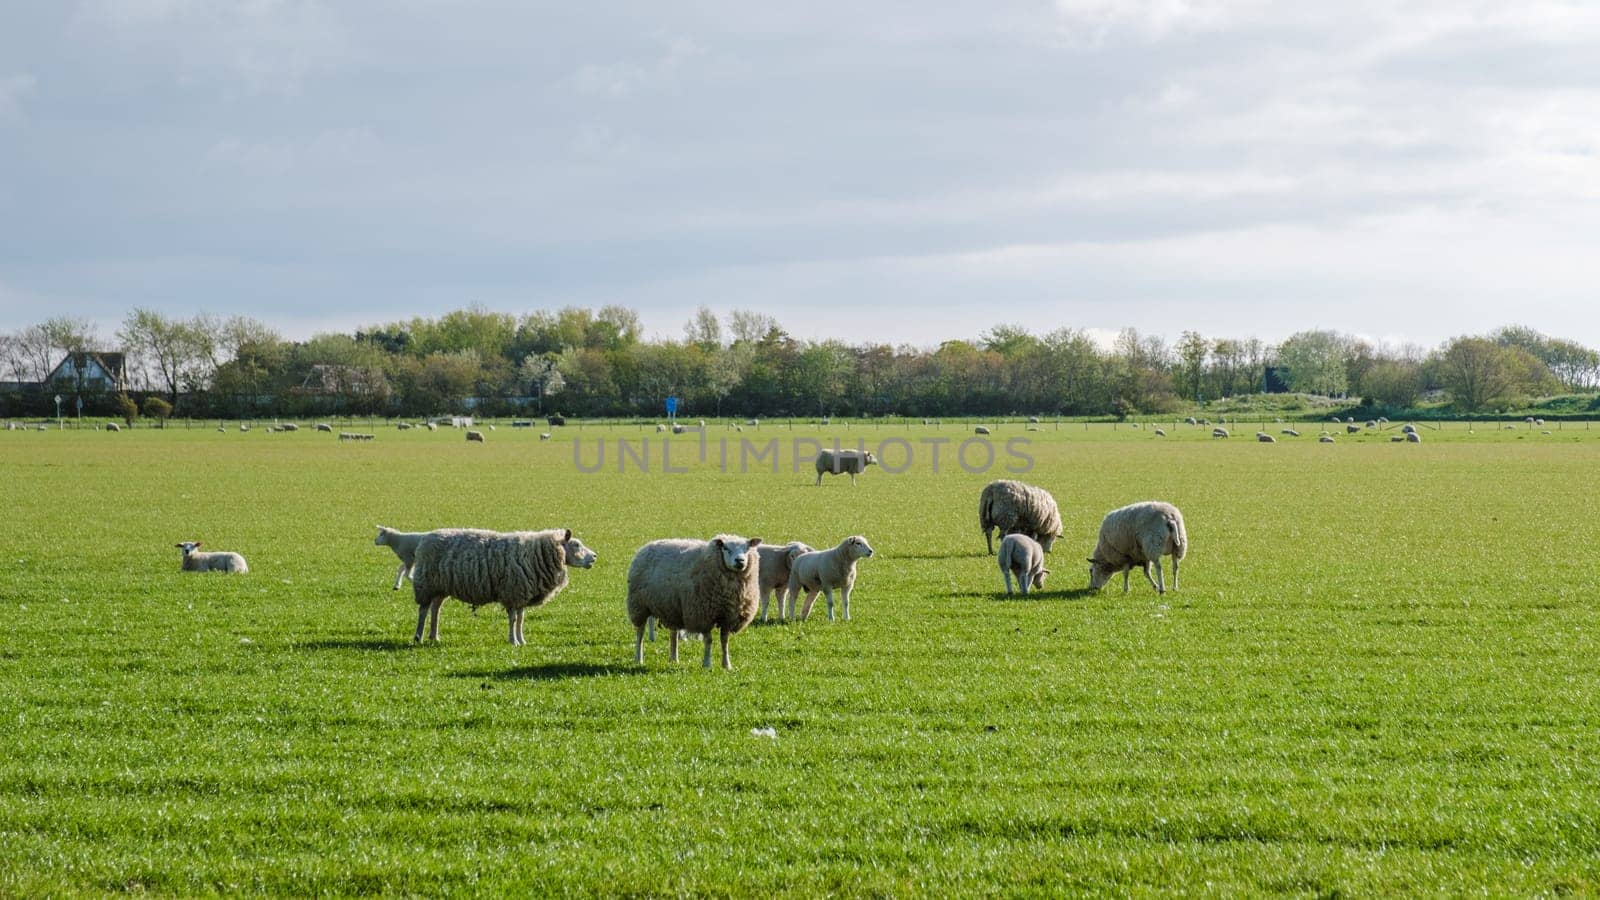 A picturesque scene unfolds in a Texel field as a group of sheep peacefully graze together under the suns warm glow.